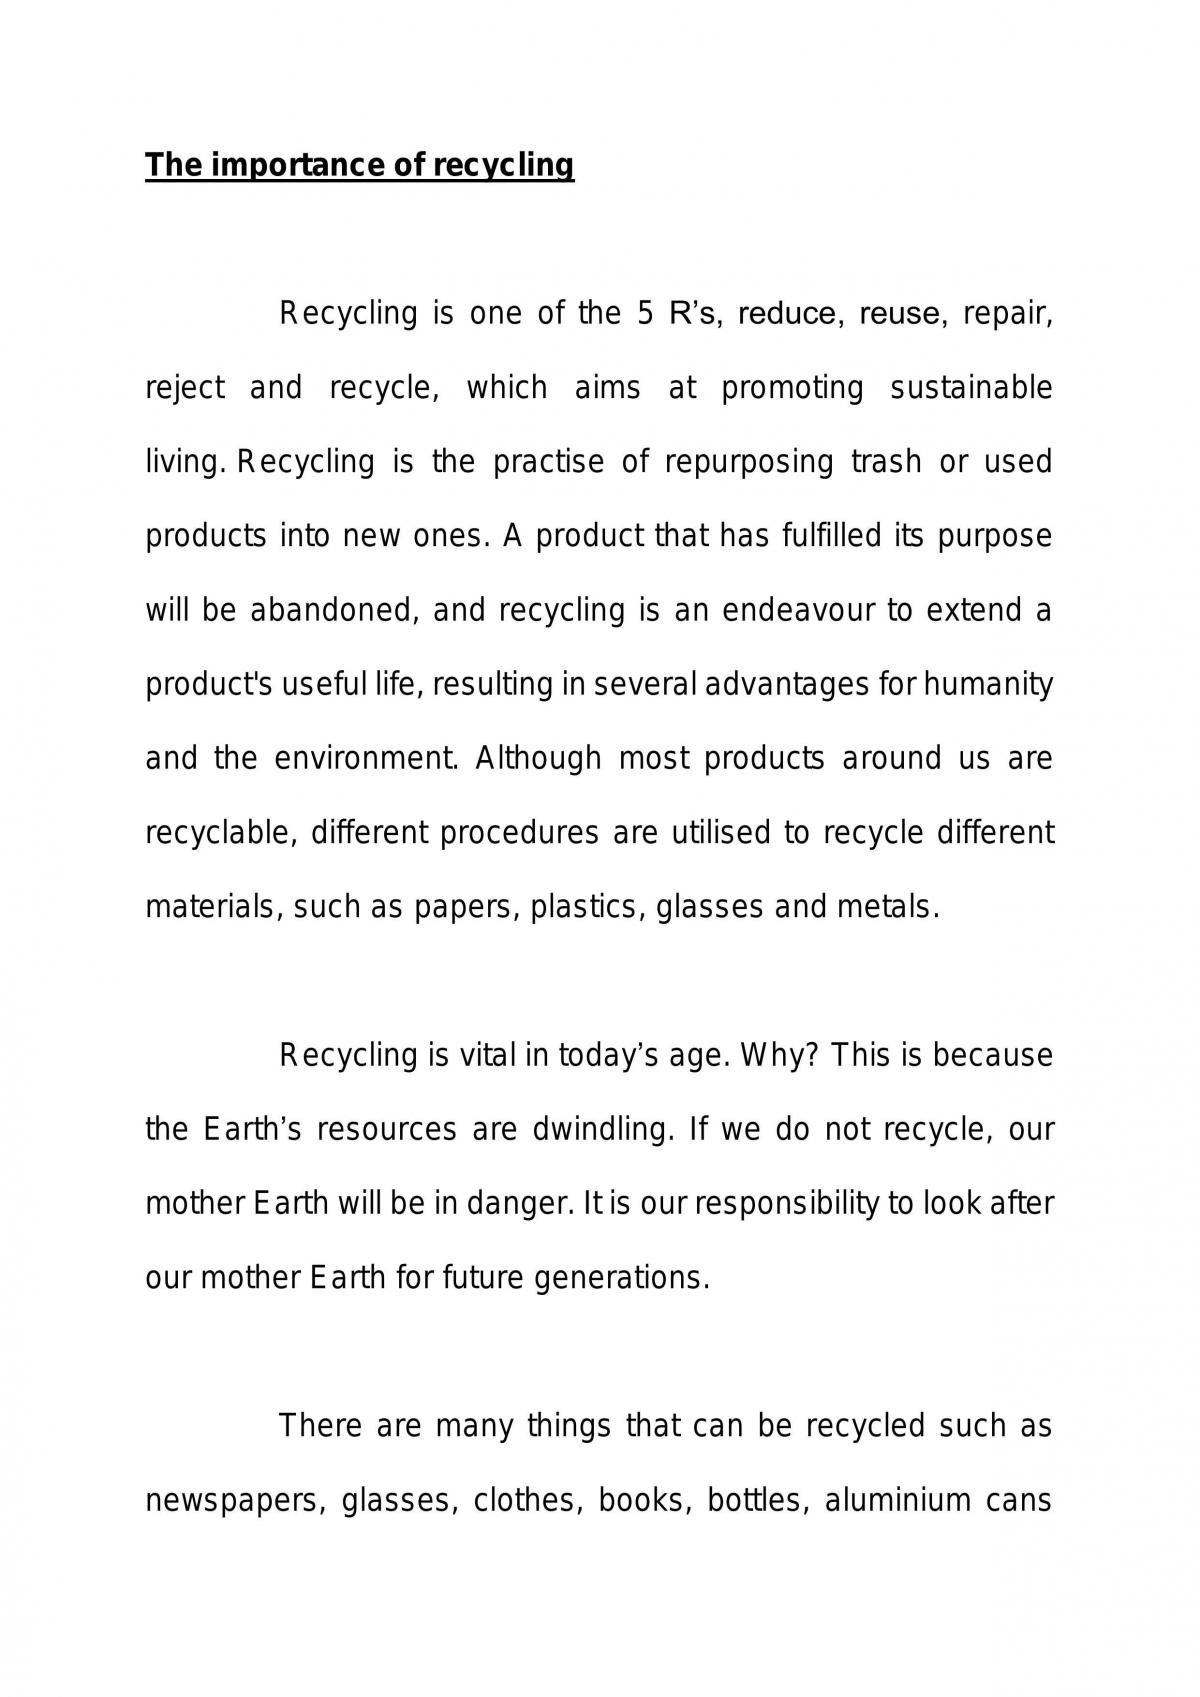 essay about recycling 150 words